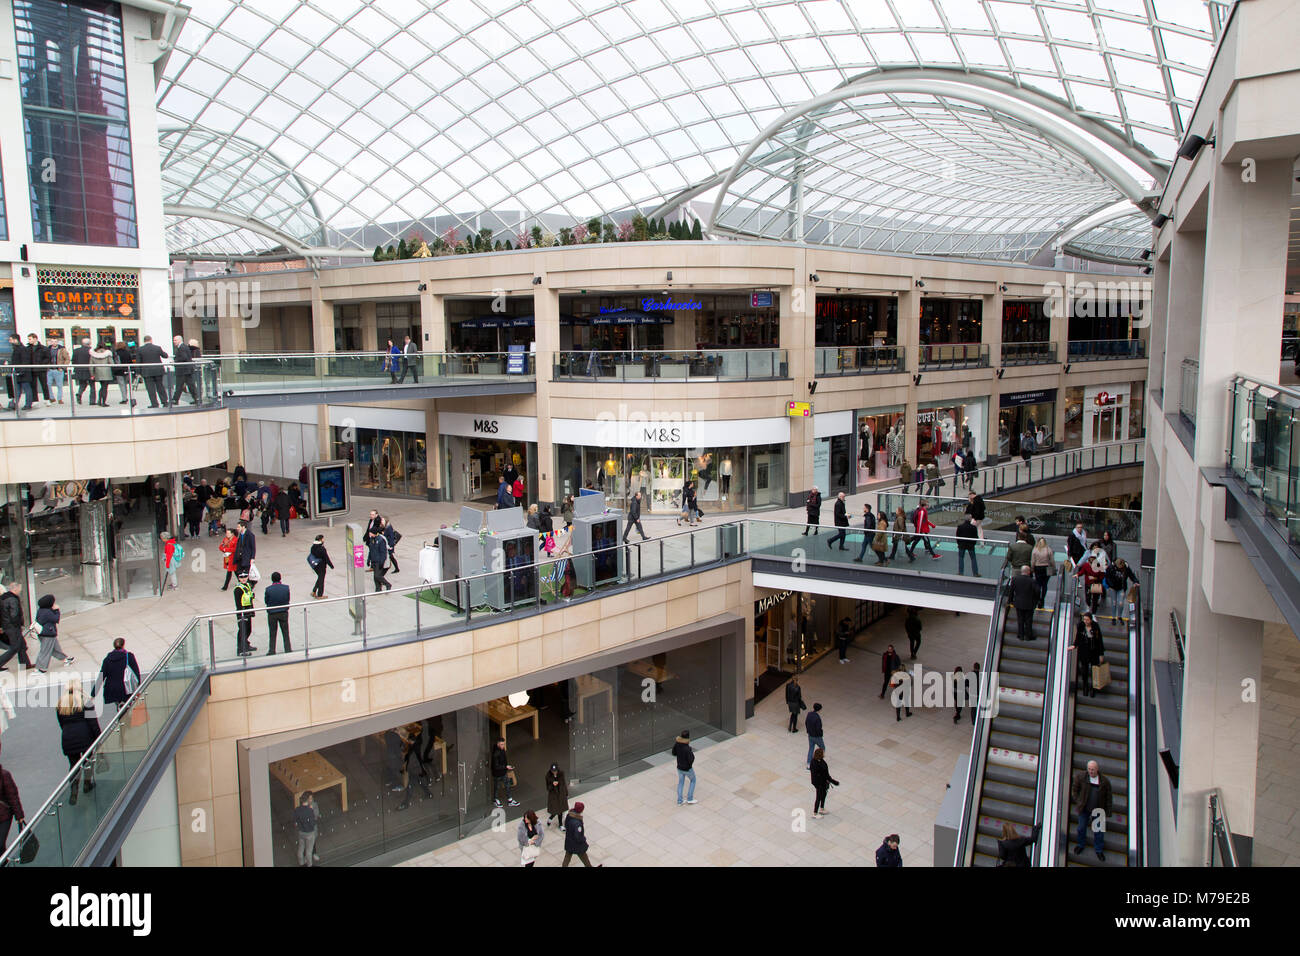 Leeds Trinity Shopping Centre in Leeds, UK. The mall opened in 2013 and is named after the neighbouring Holy Trinity Church. Stock Photo